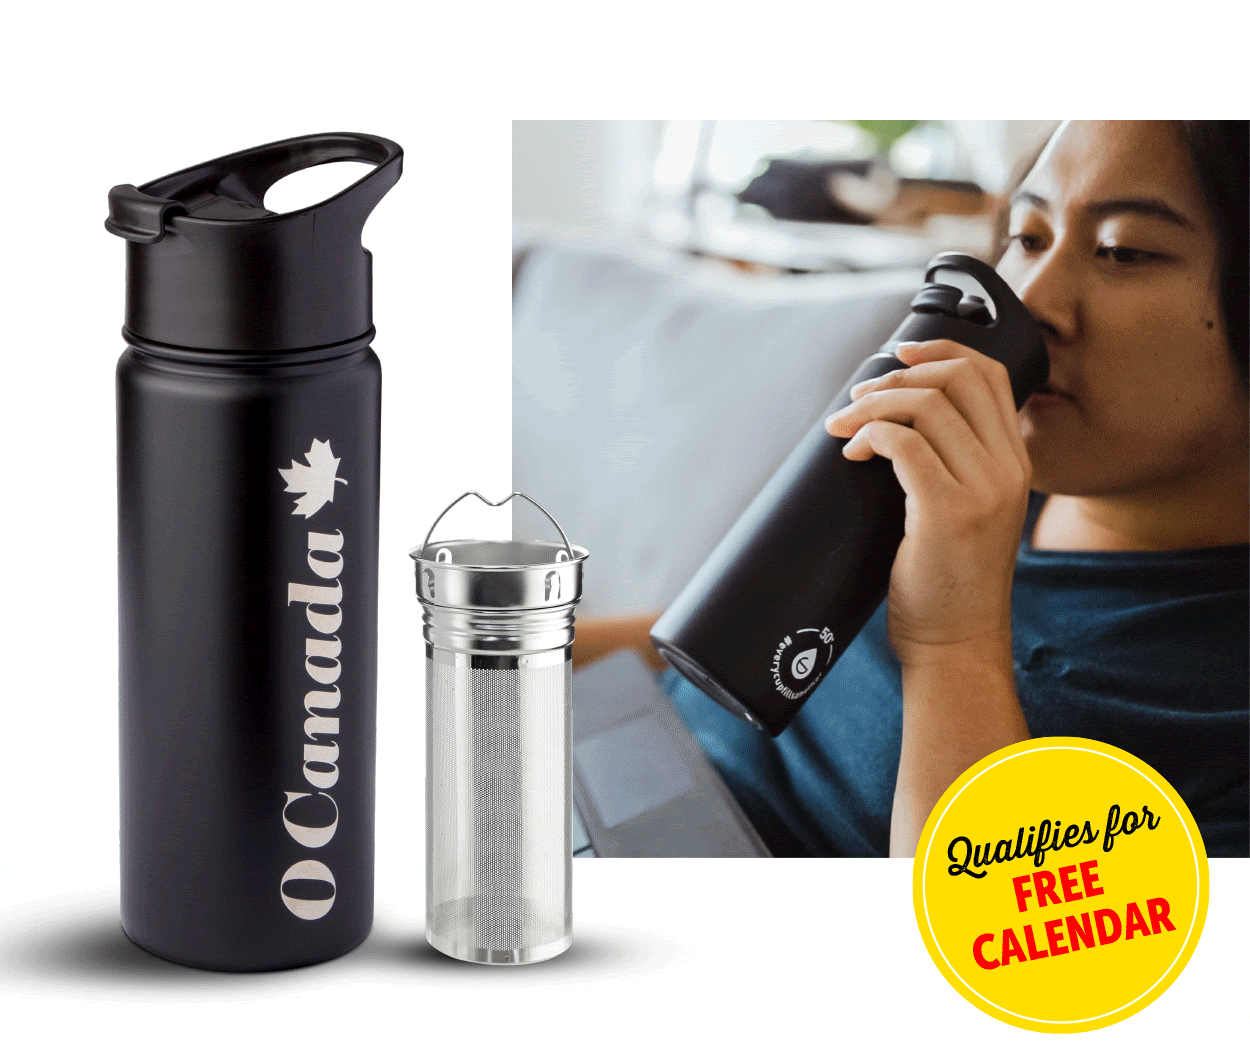 O Canada Infuser Bottle Only $32.99 Qualifies for free calendar!